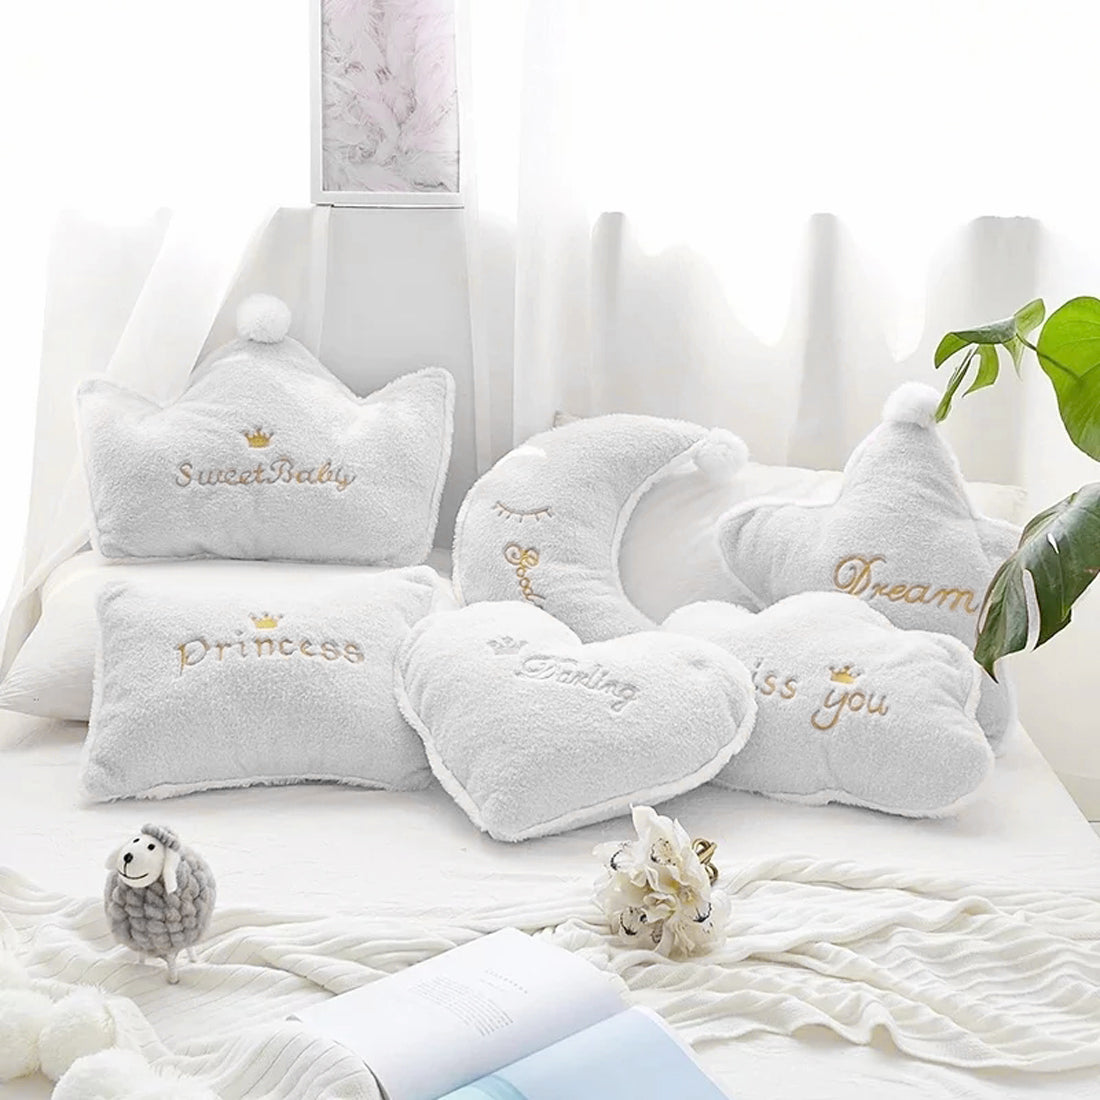 Cozy white pillow adorned with "good night" for peaceful sleep.